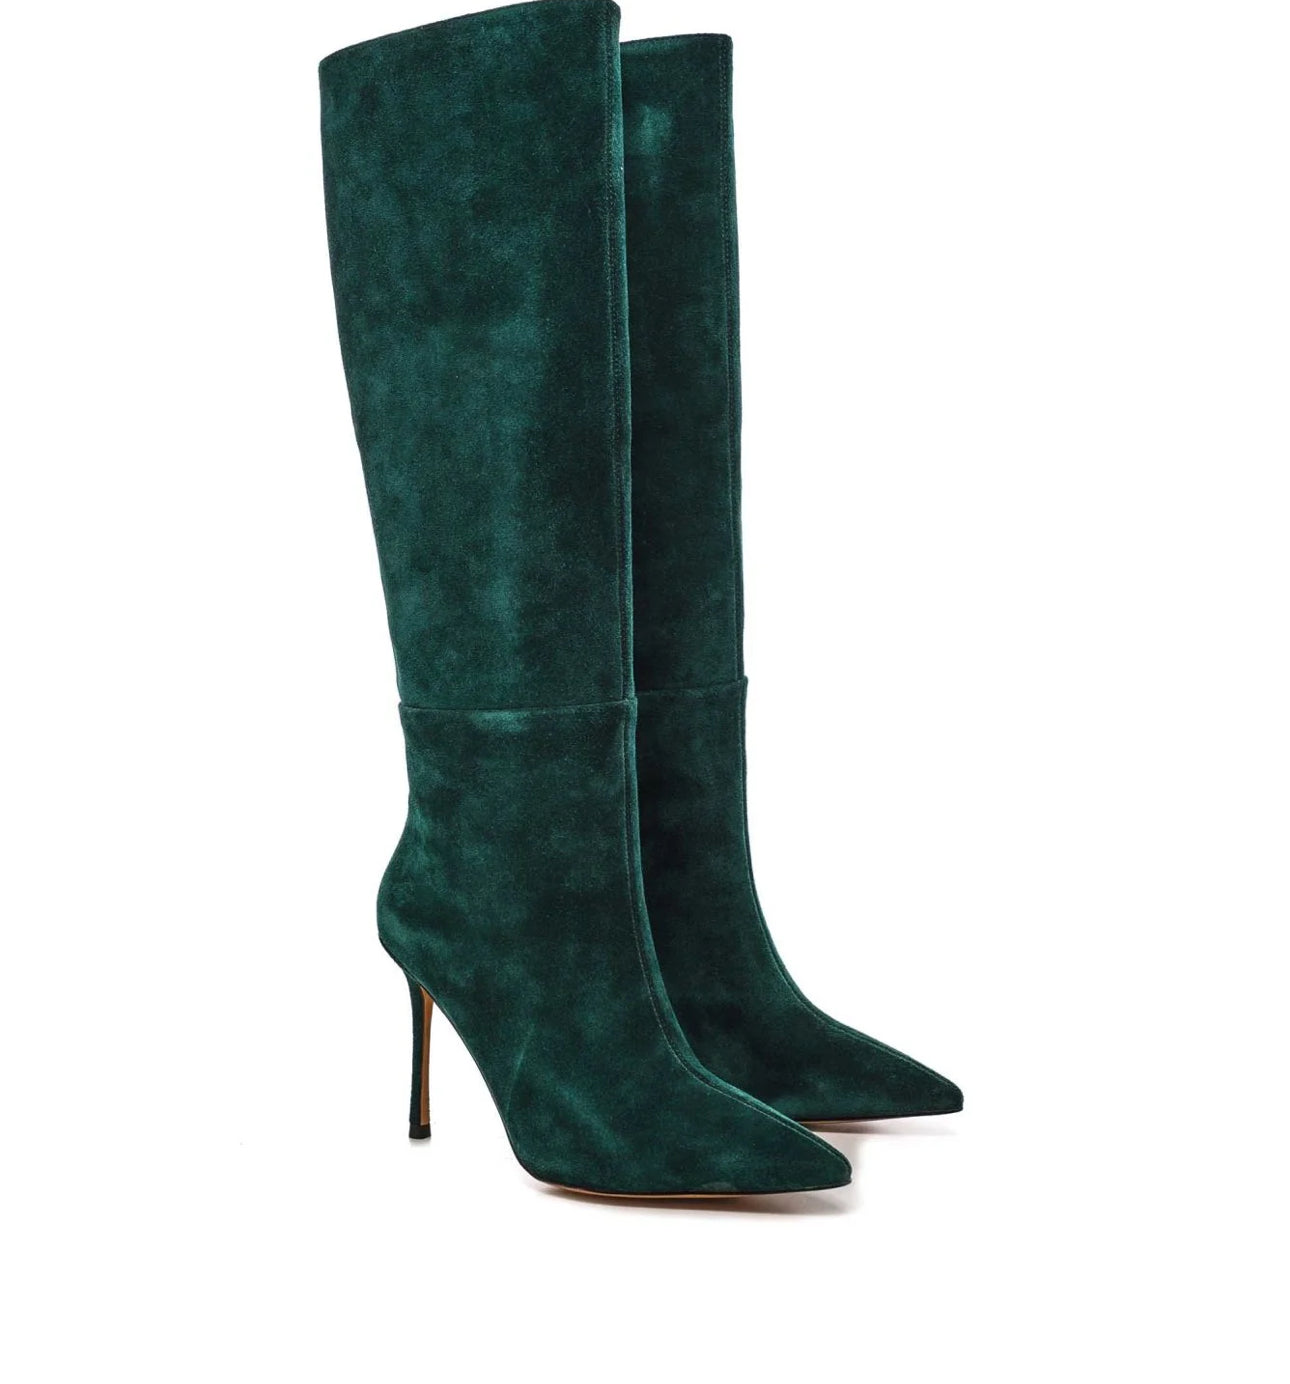 Bodin Emerald Suede is